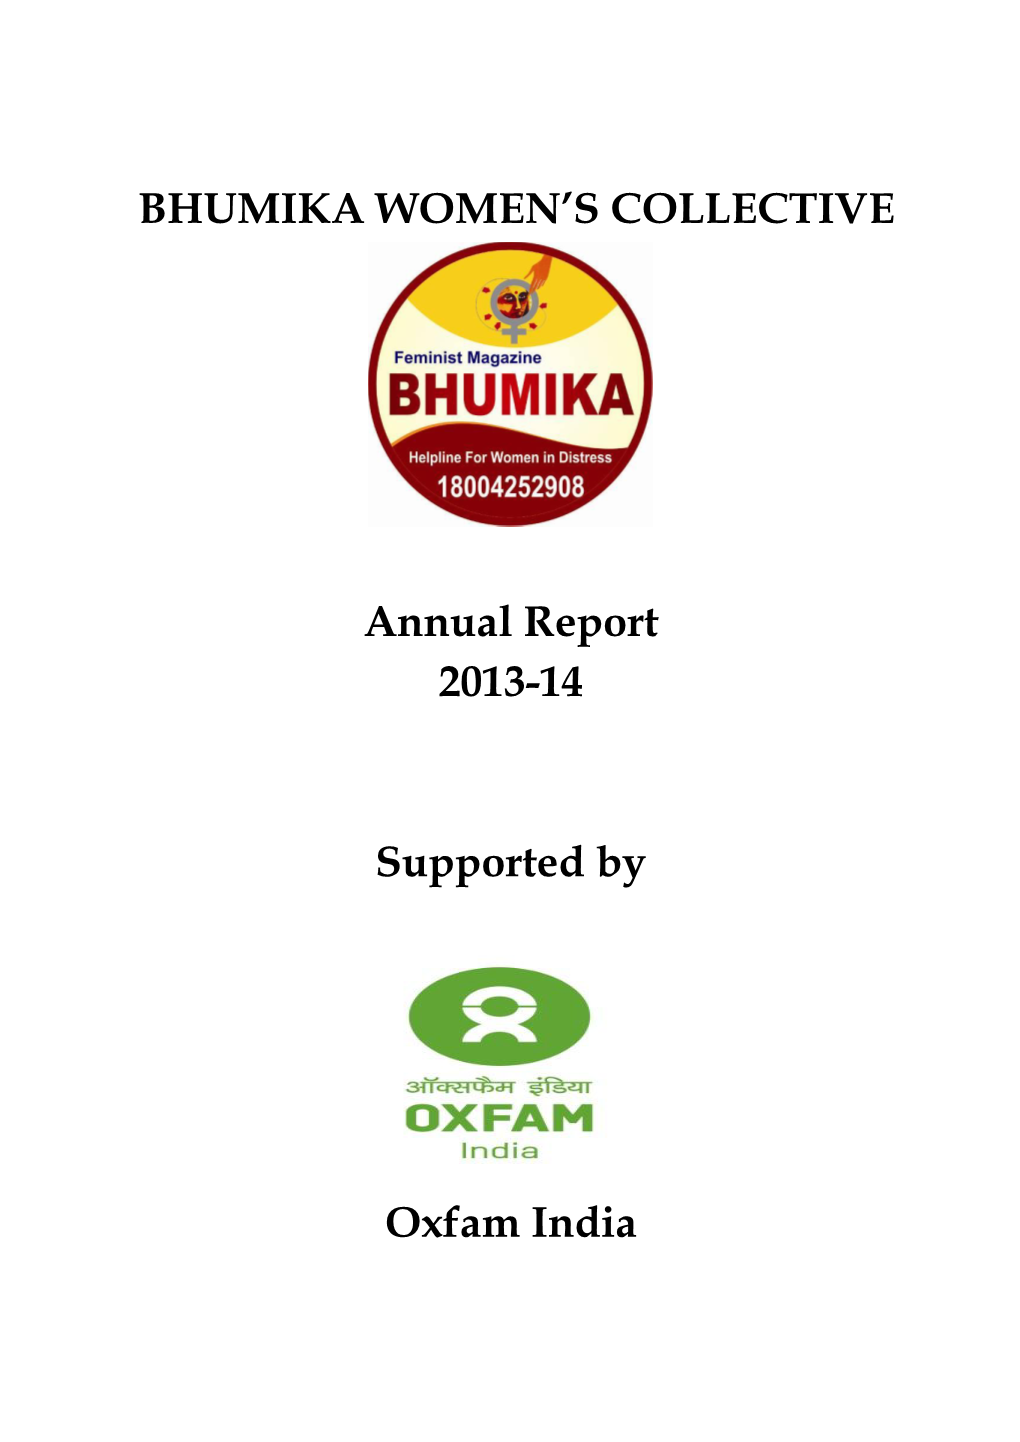 BHUMIKA WOMEN's COLLECTIVE Annual Report 2013-14 Supported